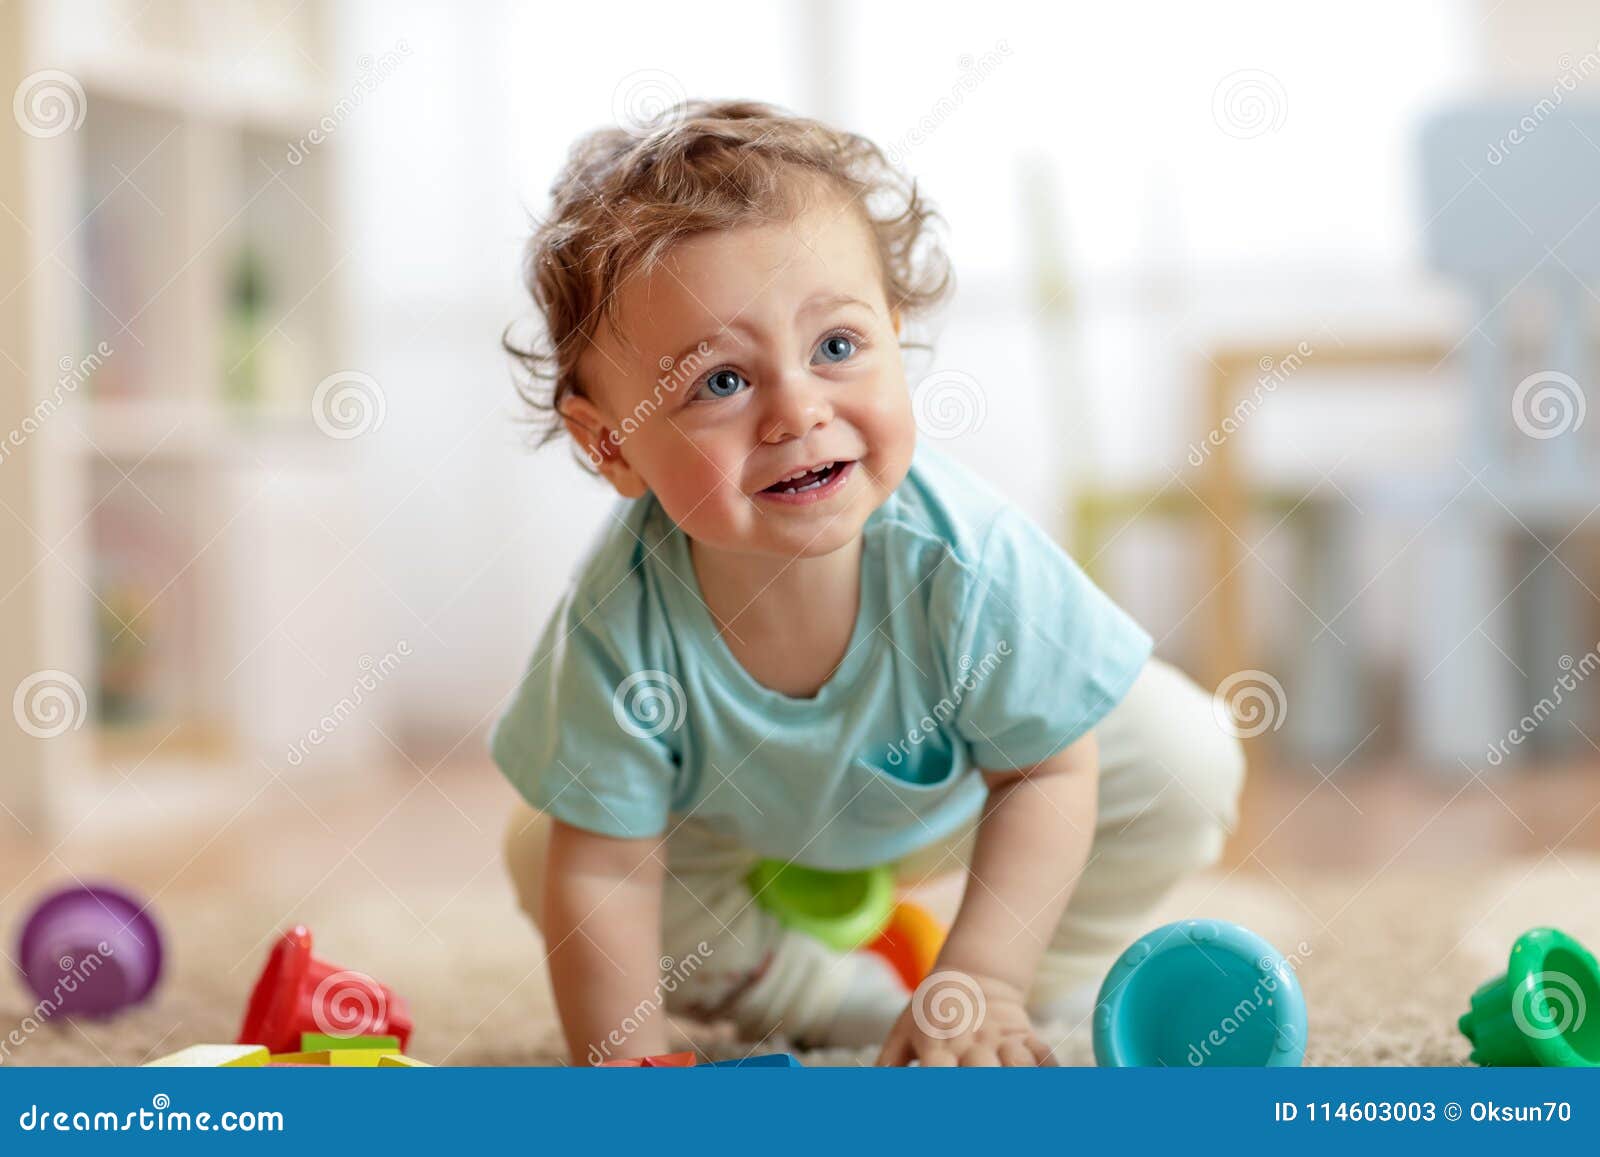 cute infant baby crawling on the floor at home, playing with colorful toys